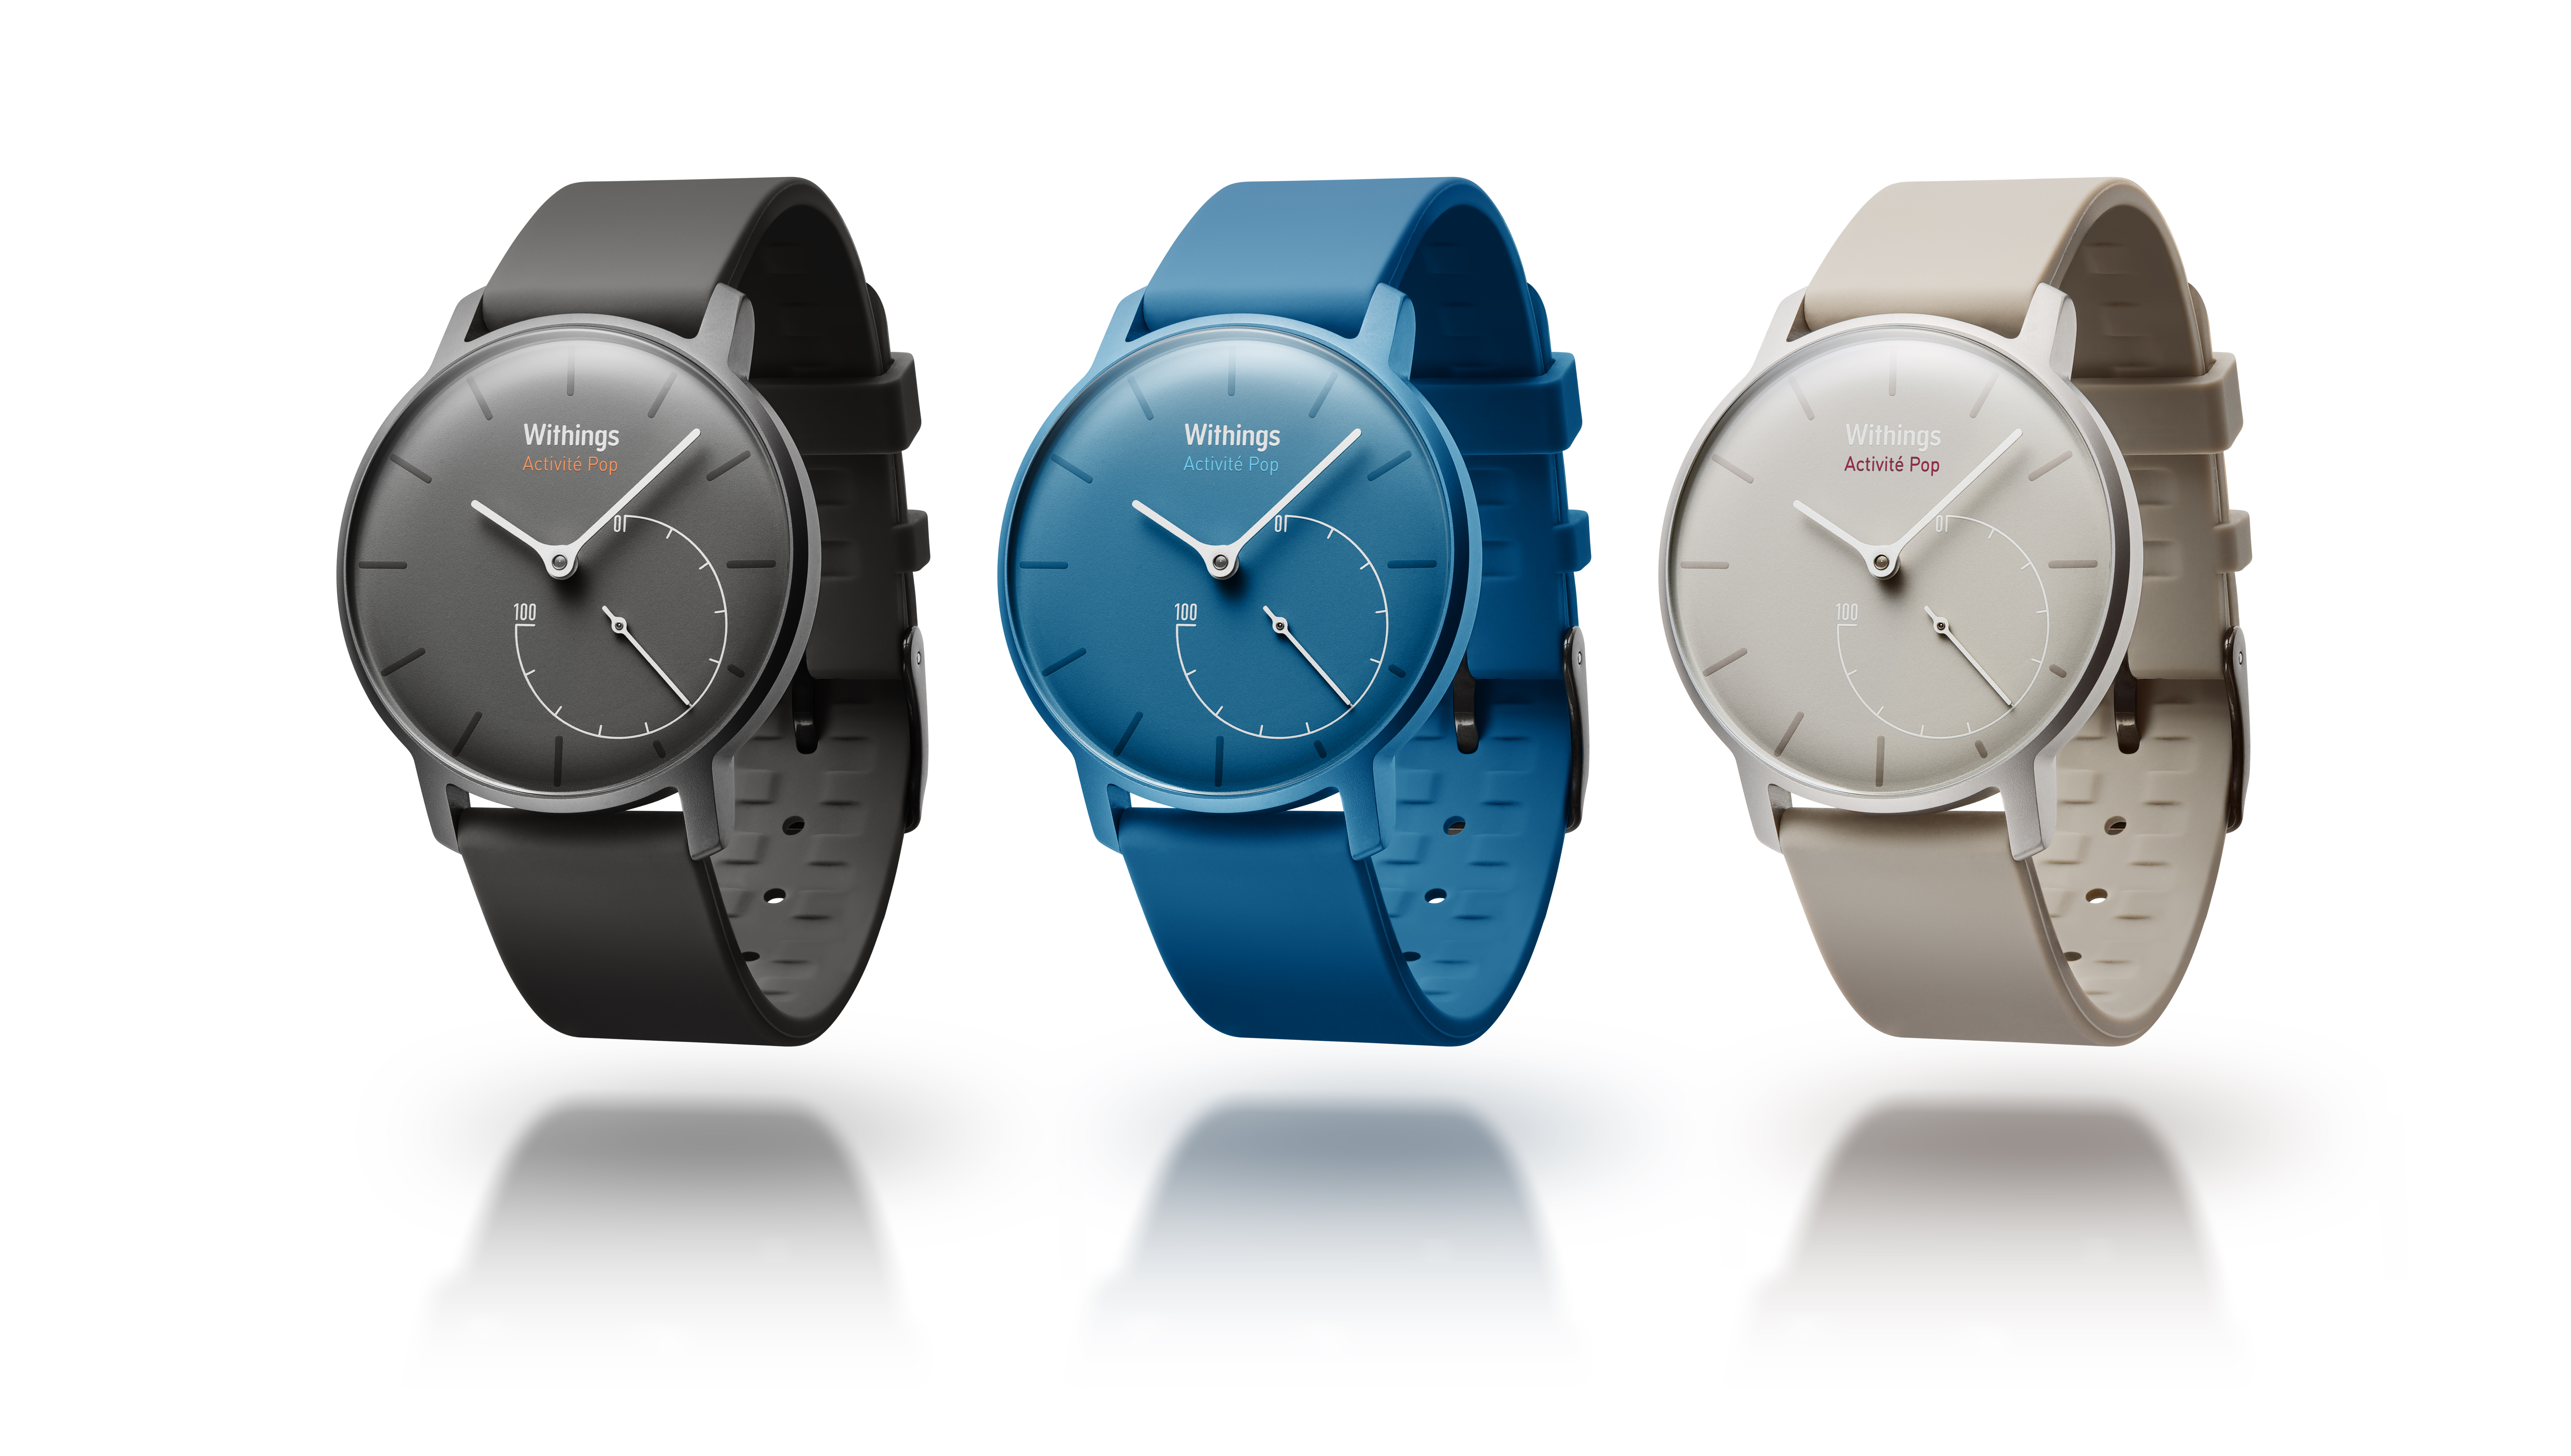 woede Locomotief Stereotype The Withings Activité Pop Is Probably The Best Overall Activity Tracker Yet  | TechCrunch